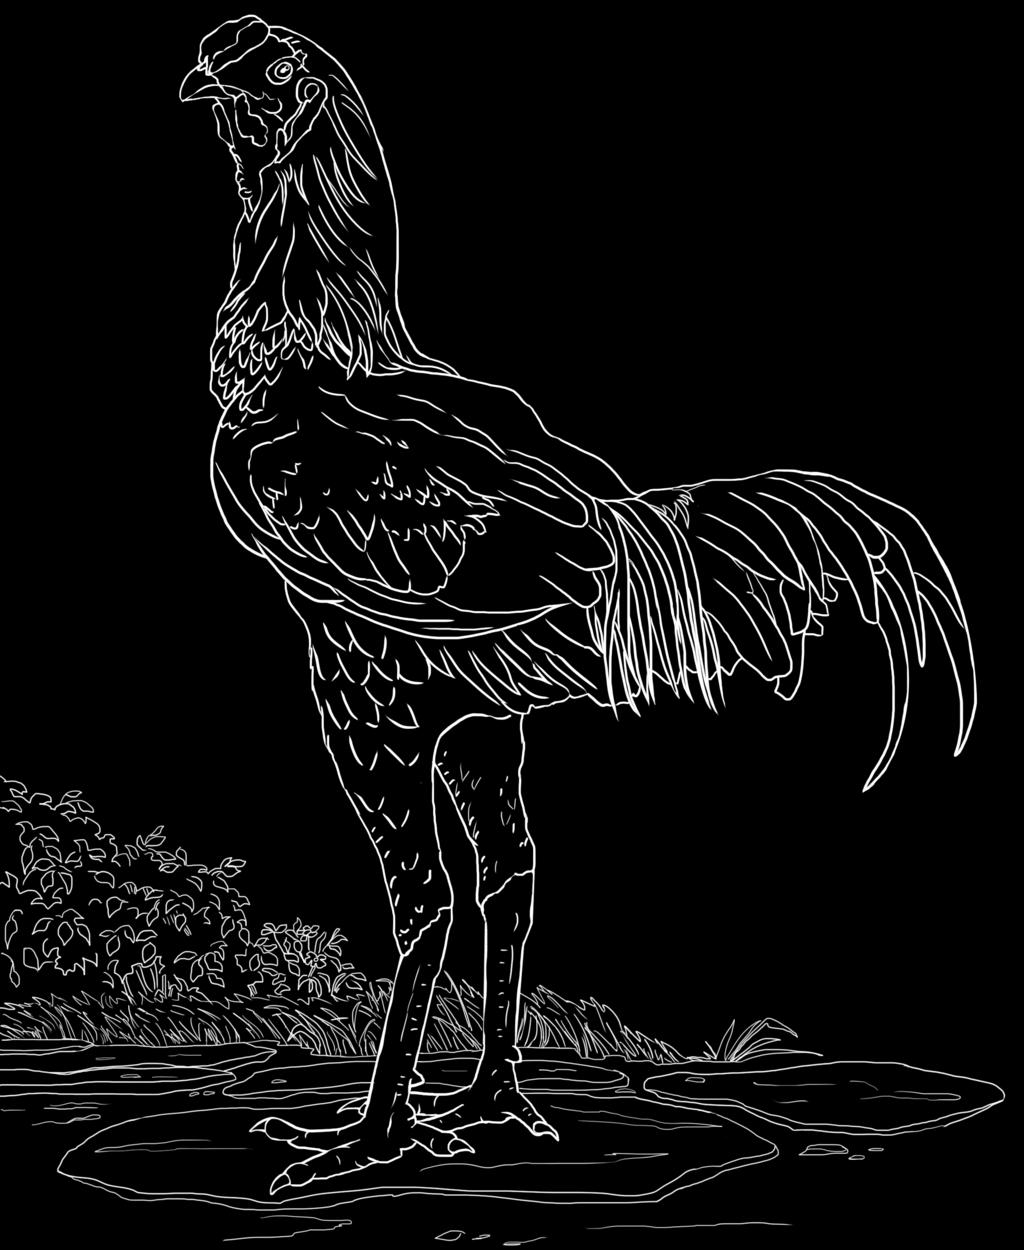 Malay [may-lay] - Malay s are the basketball players of the chicken world.